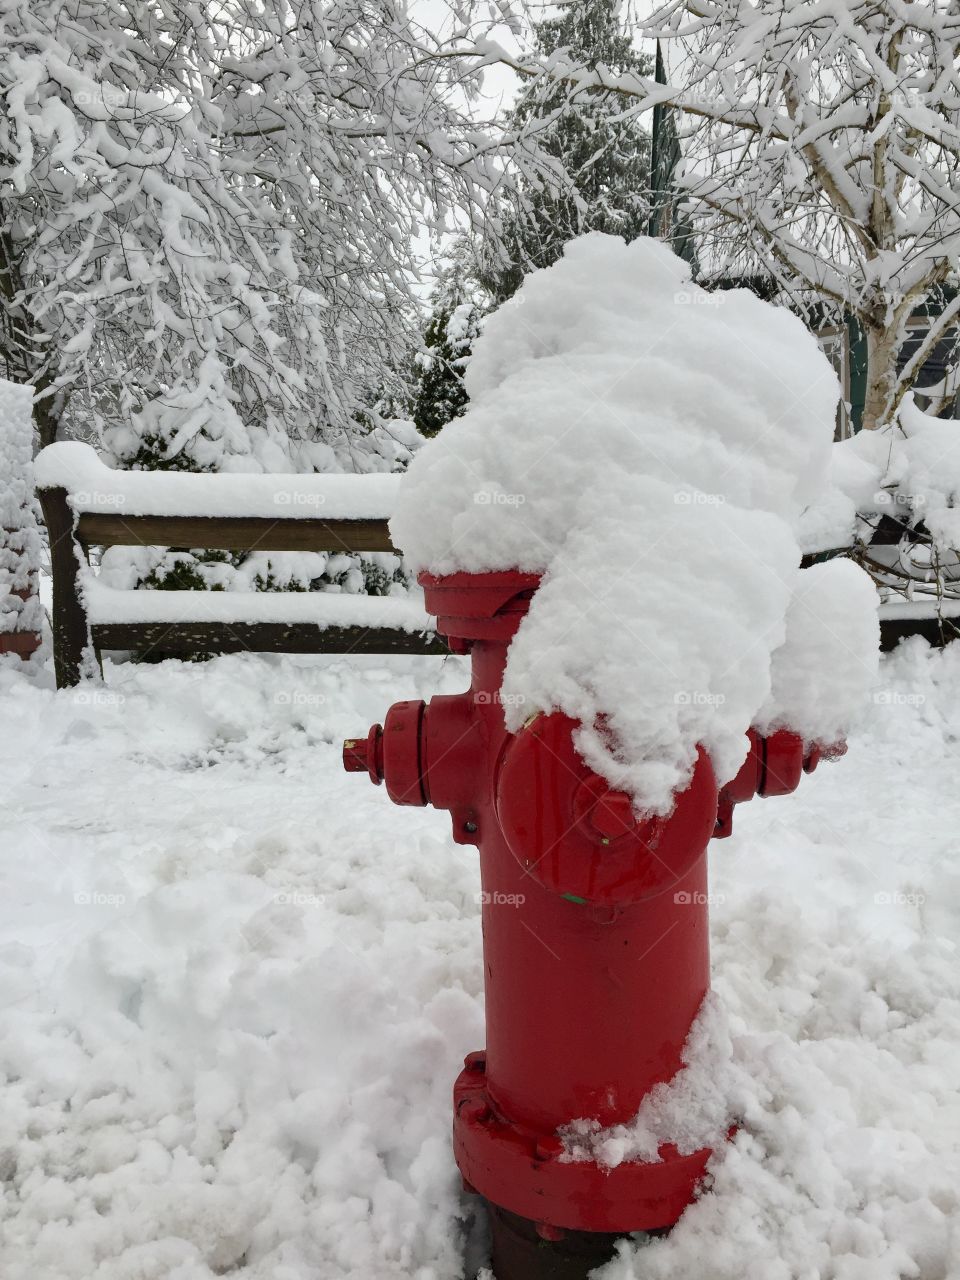 Fire Hydrant in the snow